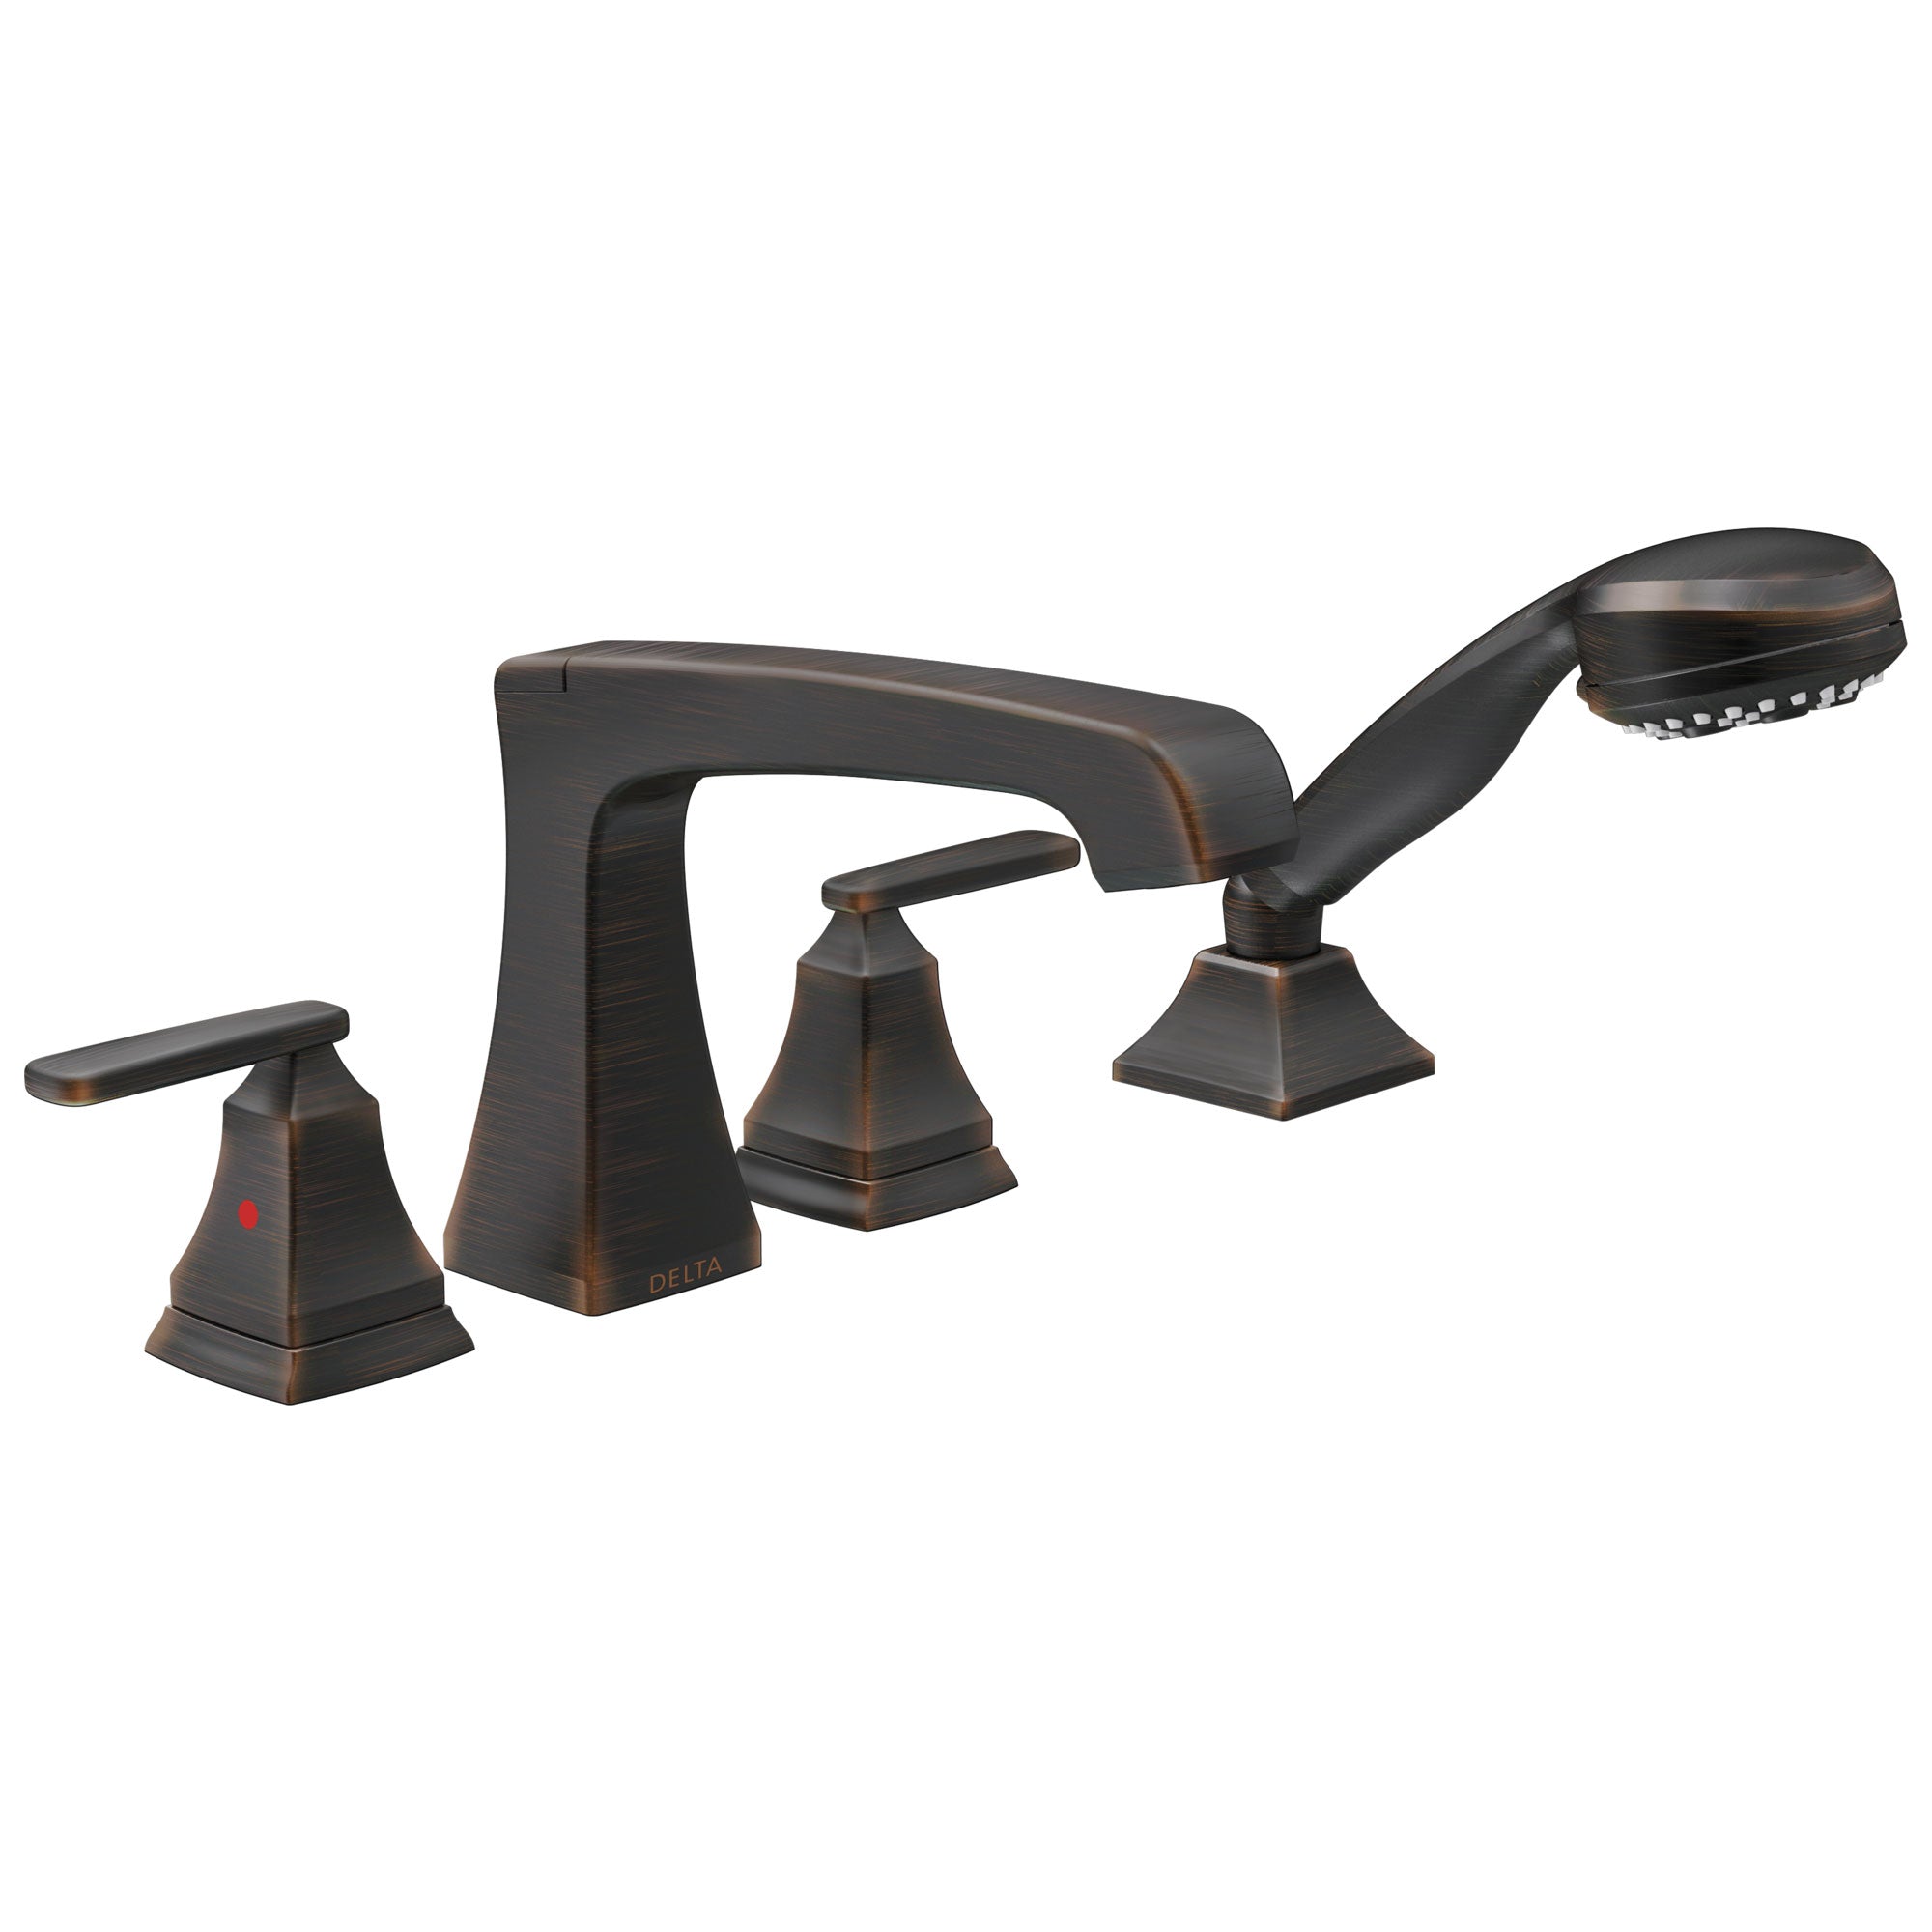 Delta Ashlyn Collection Venetian Bronze Finish High Flow Roman Bath Tub Filler Faucet Trim with Hand Shower Sprayer Includes Trim Kit and Rough-in Valve D2075V